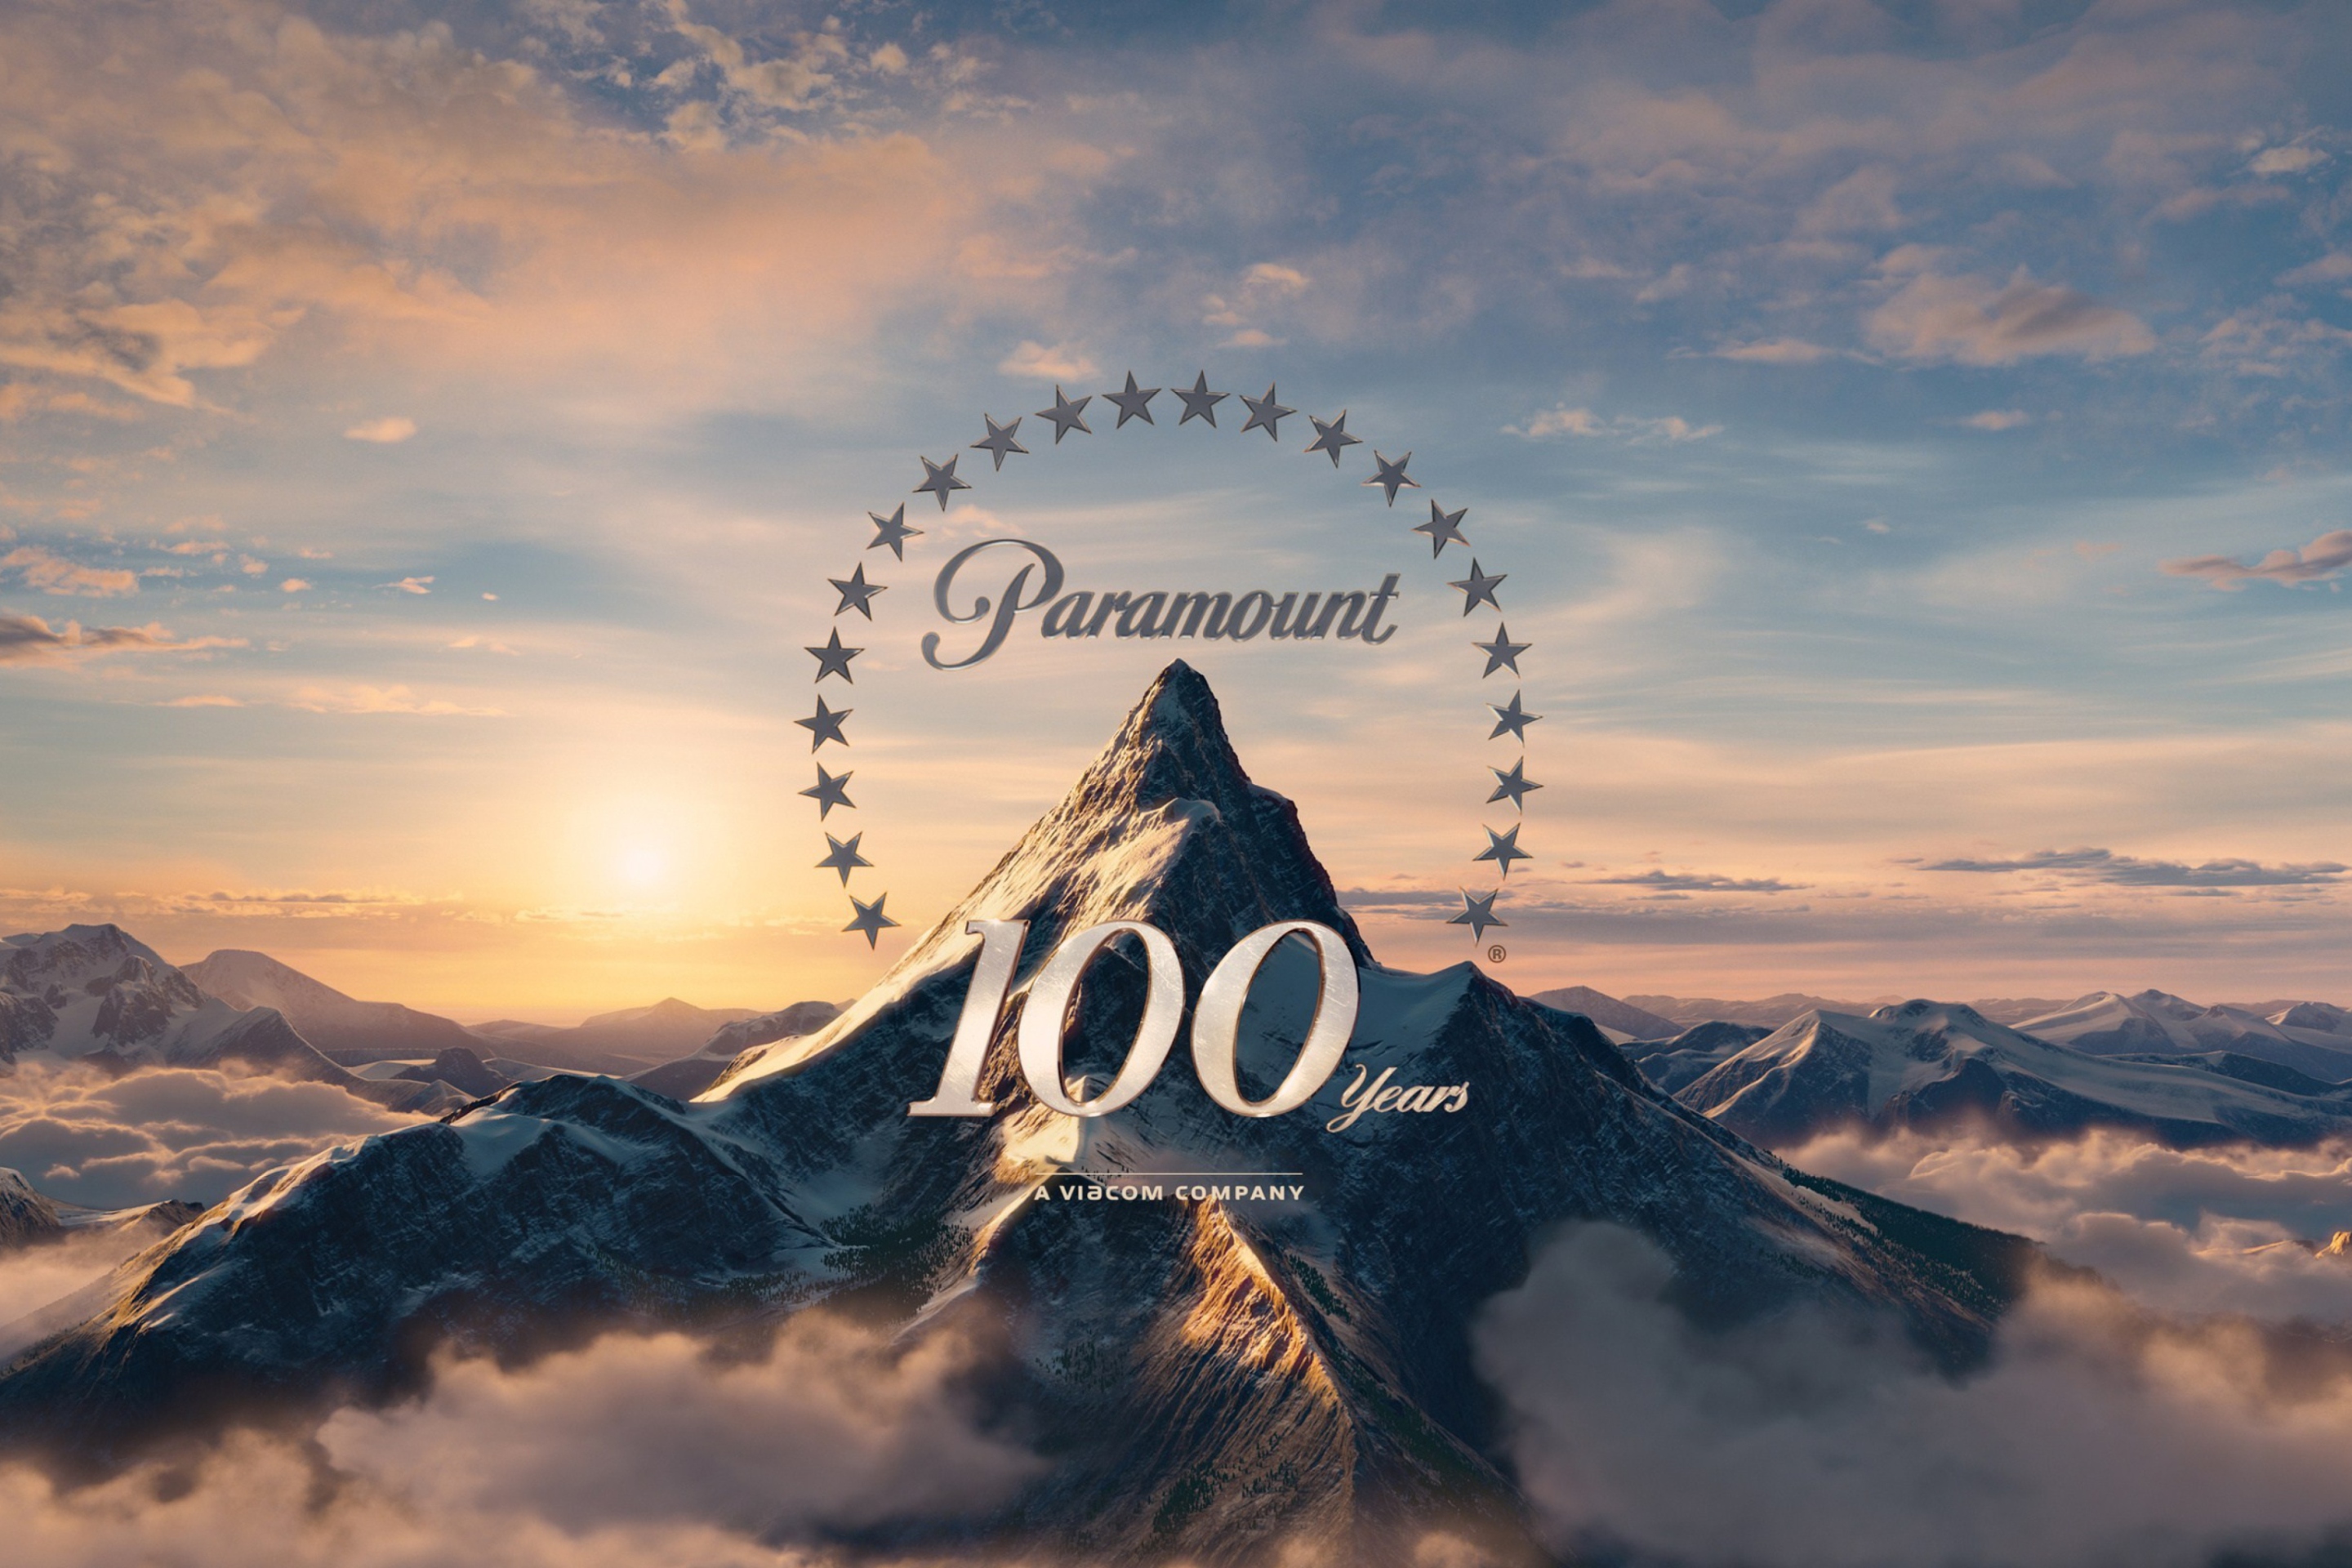 Paramount Pictures 100 Years screenshot #1 2880x1920